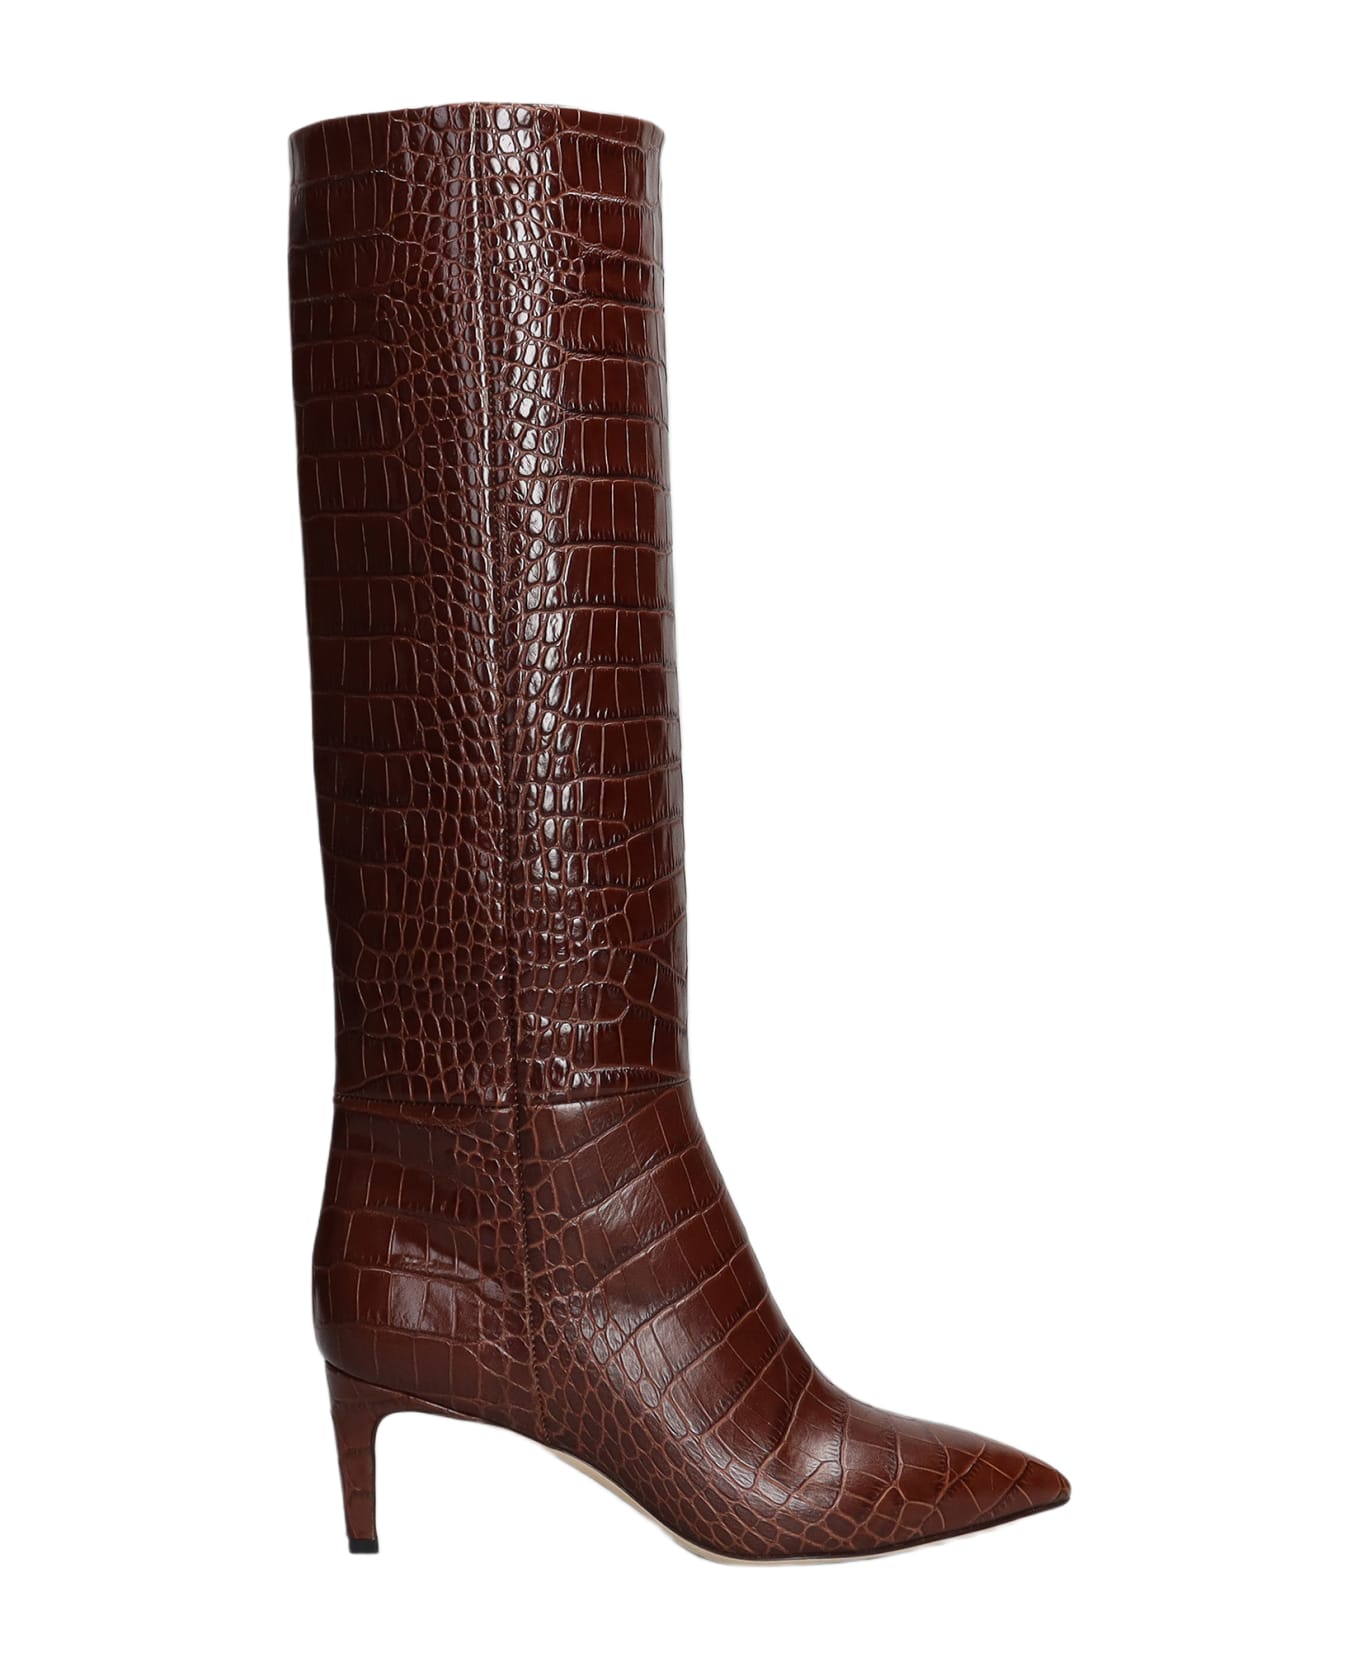 Paris Texas High Heels Boots In Brown Leather - brown